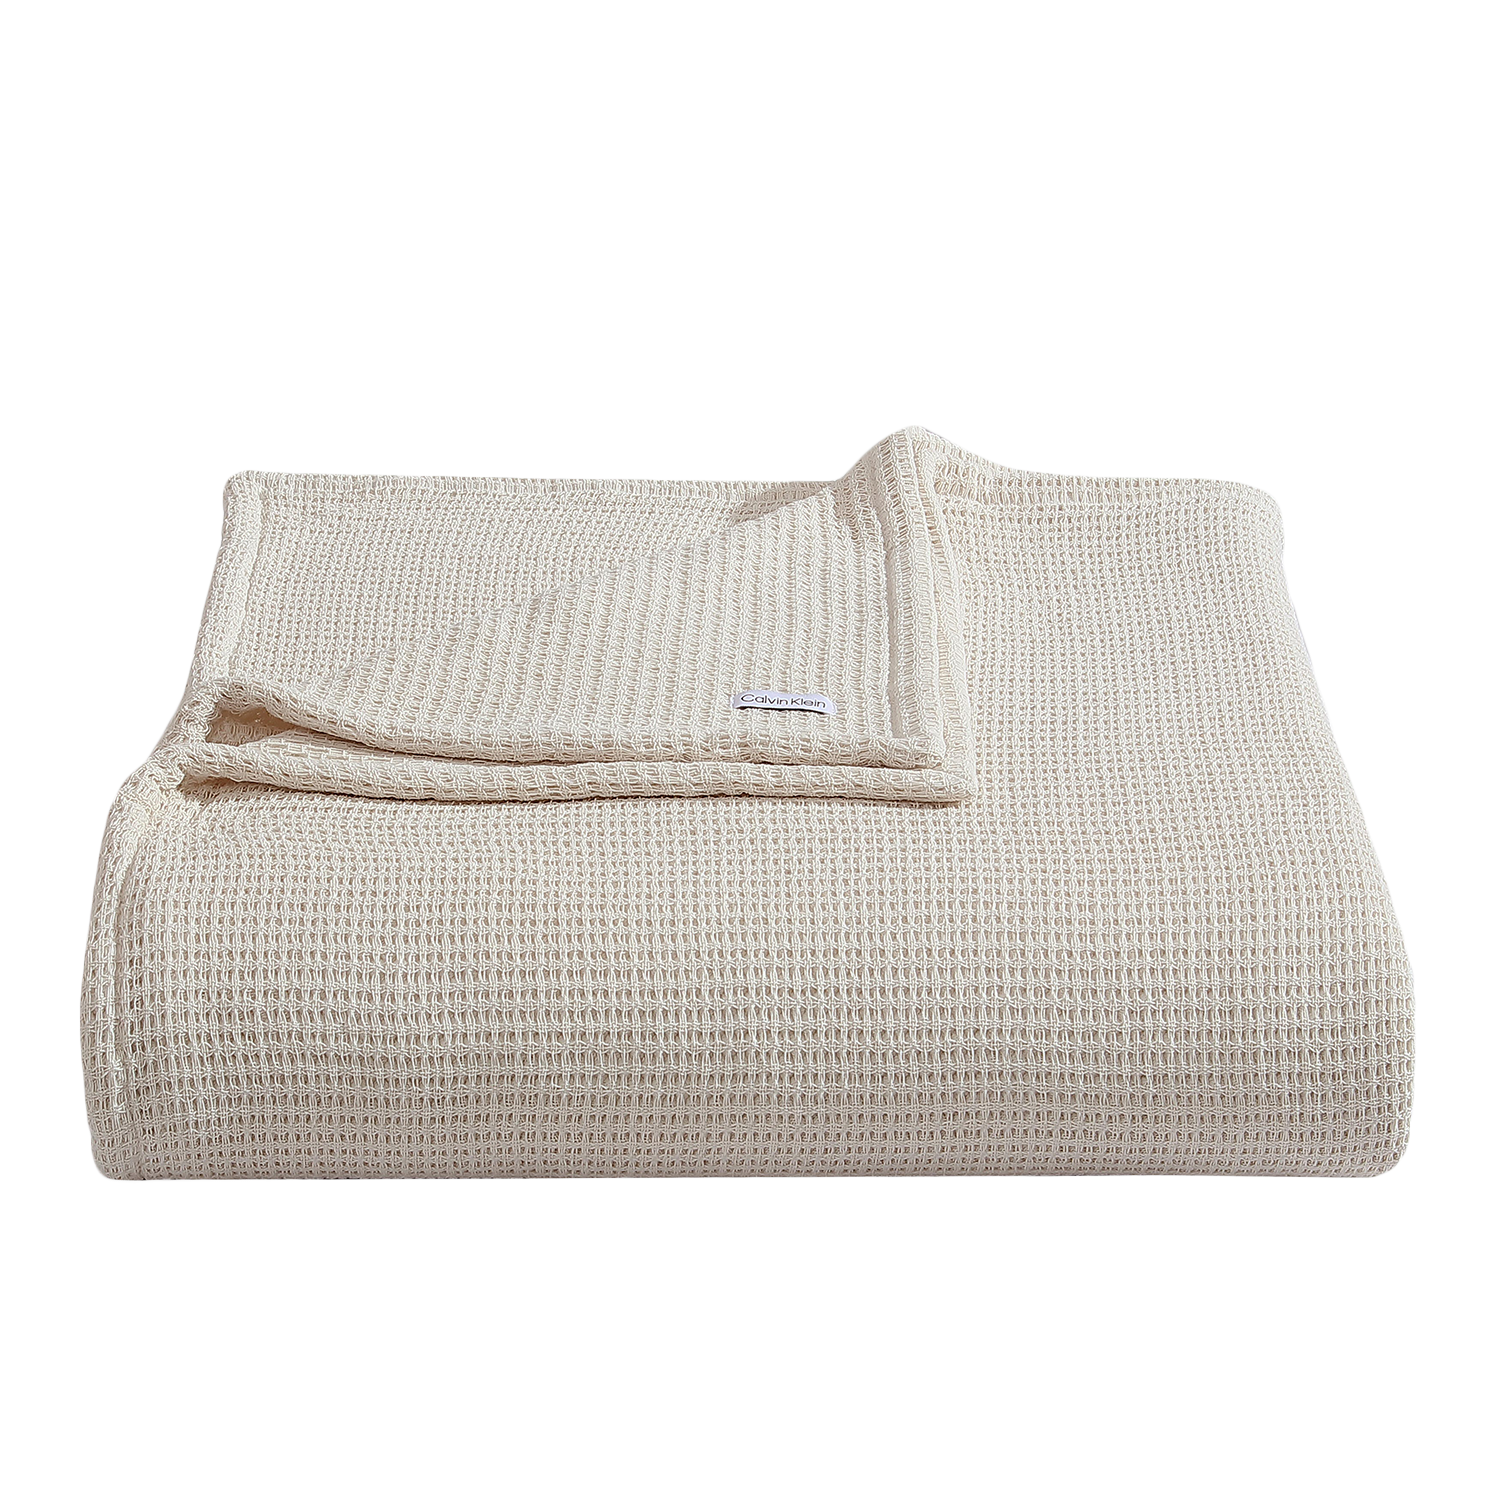 Product shot of cream-colored woven blanket.